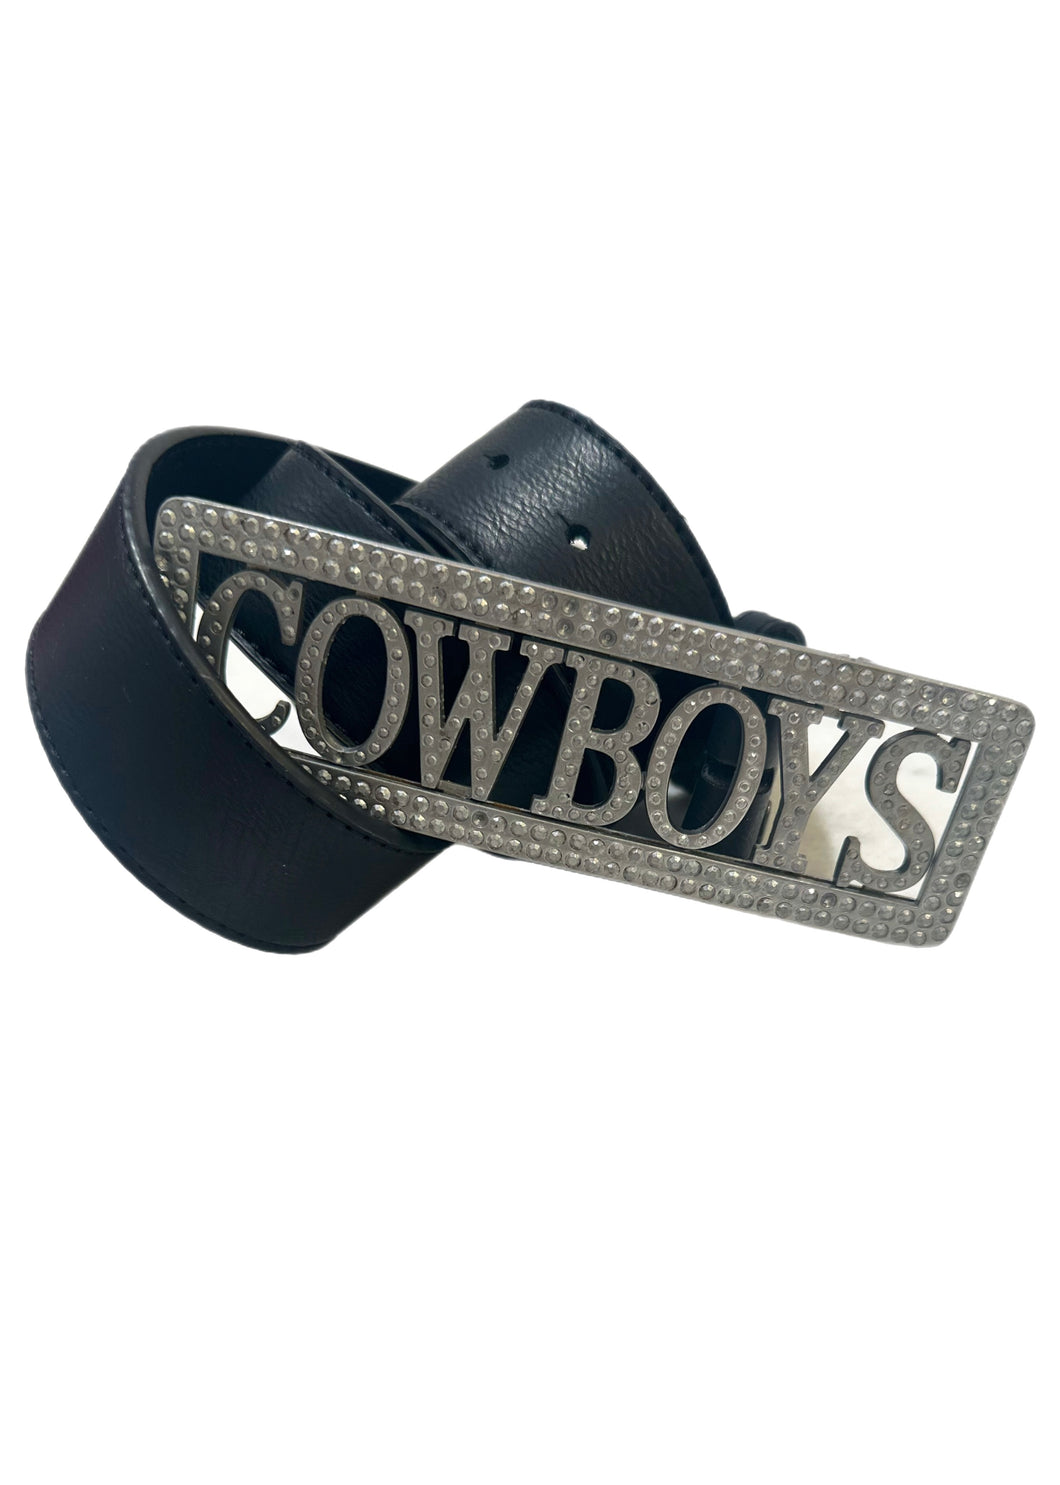 Dallas Cowboys, Football Vintage Belt Buckle with New Soft Leather Strap